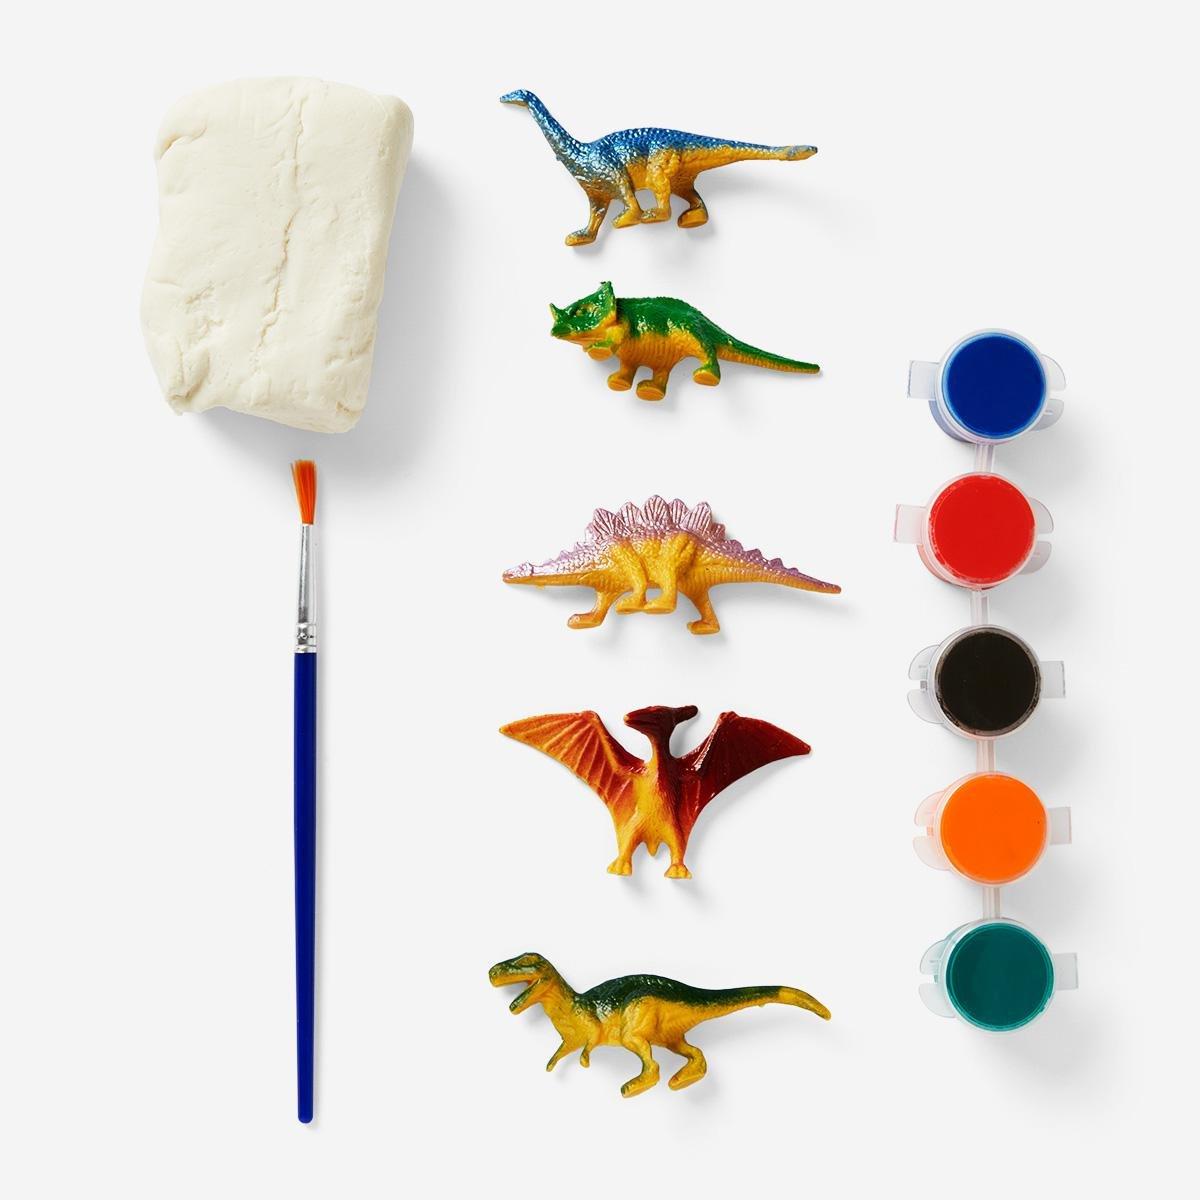 Make-your-own fossils